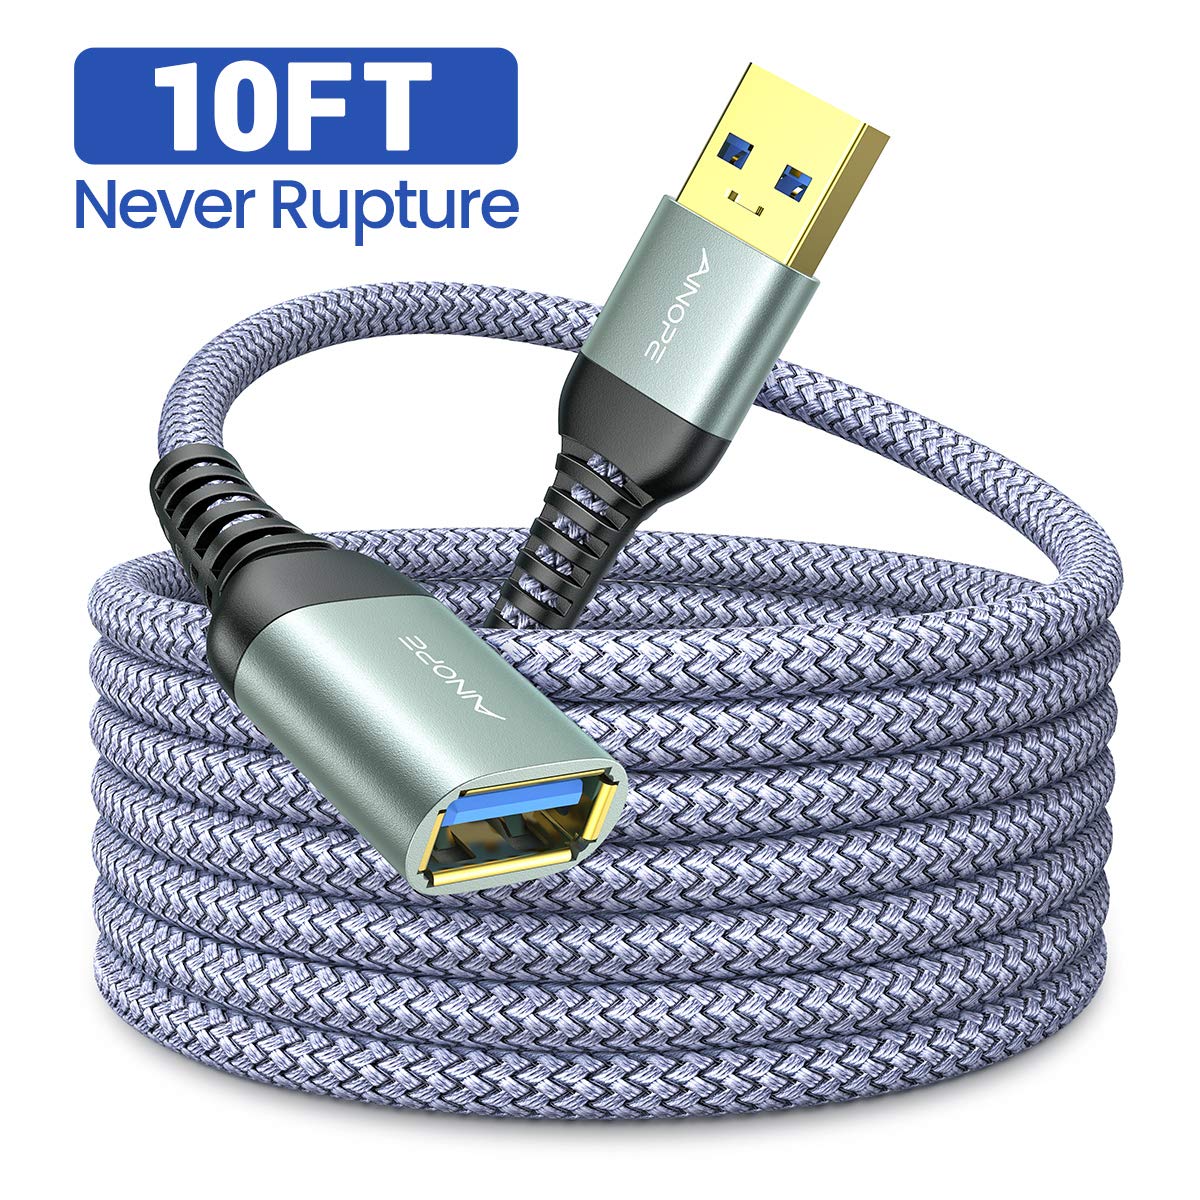 AINOPE Braided USB 3.0 Extension Cable, 10-Feet